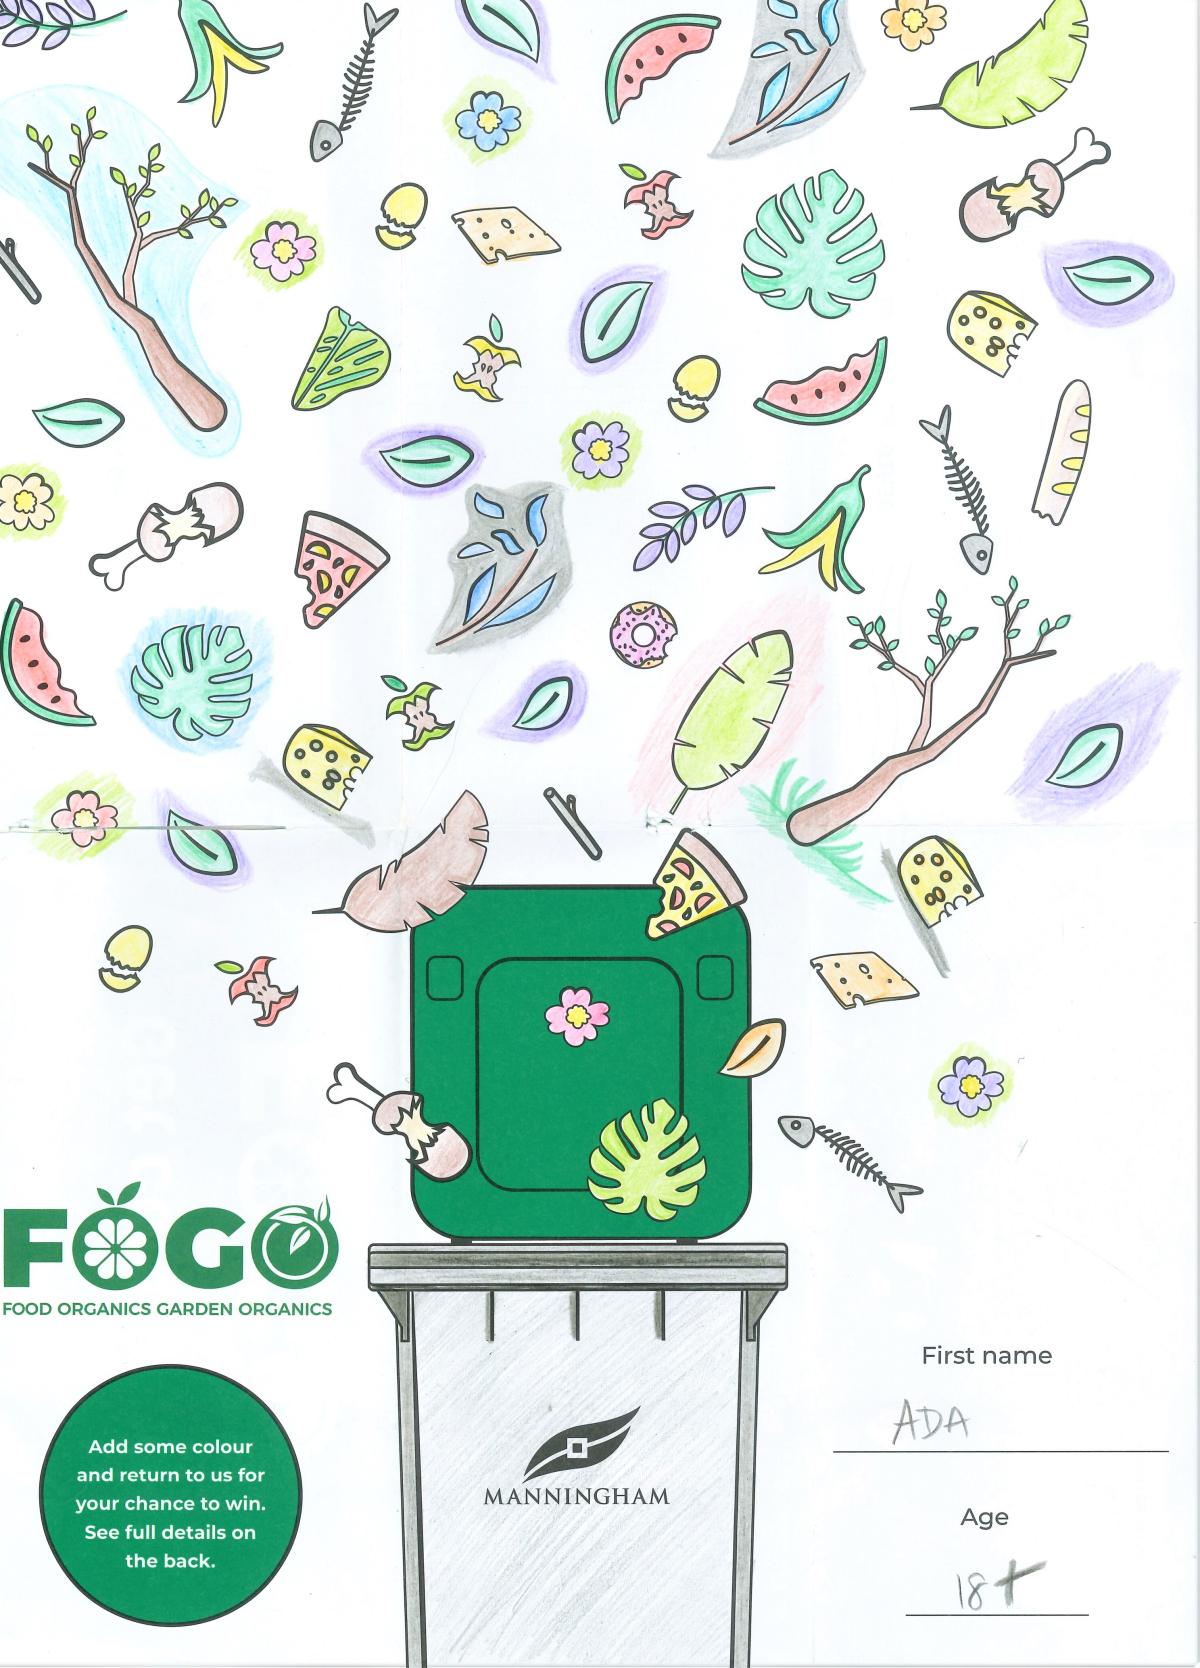 An image of a FOGO bin with all sorts of organic rubbish falling into it from above. The name 'Ada' is in the bottom right corner.